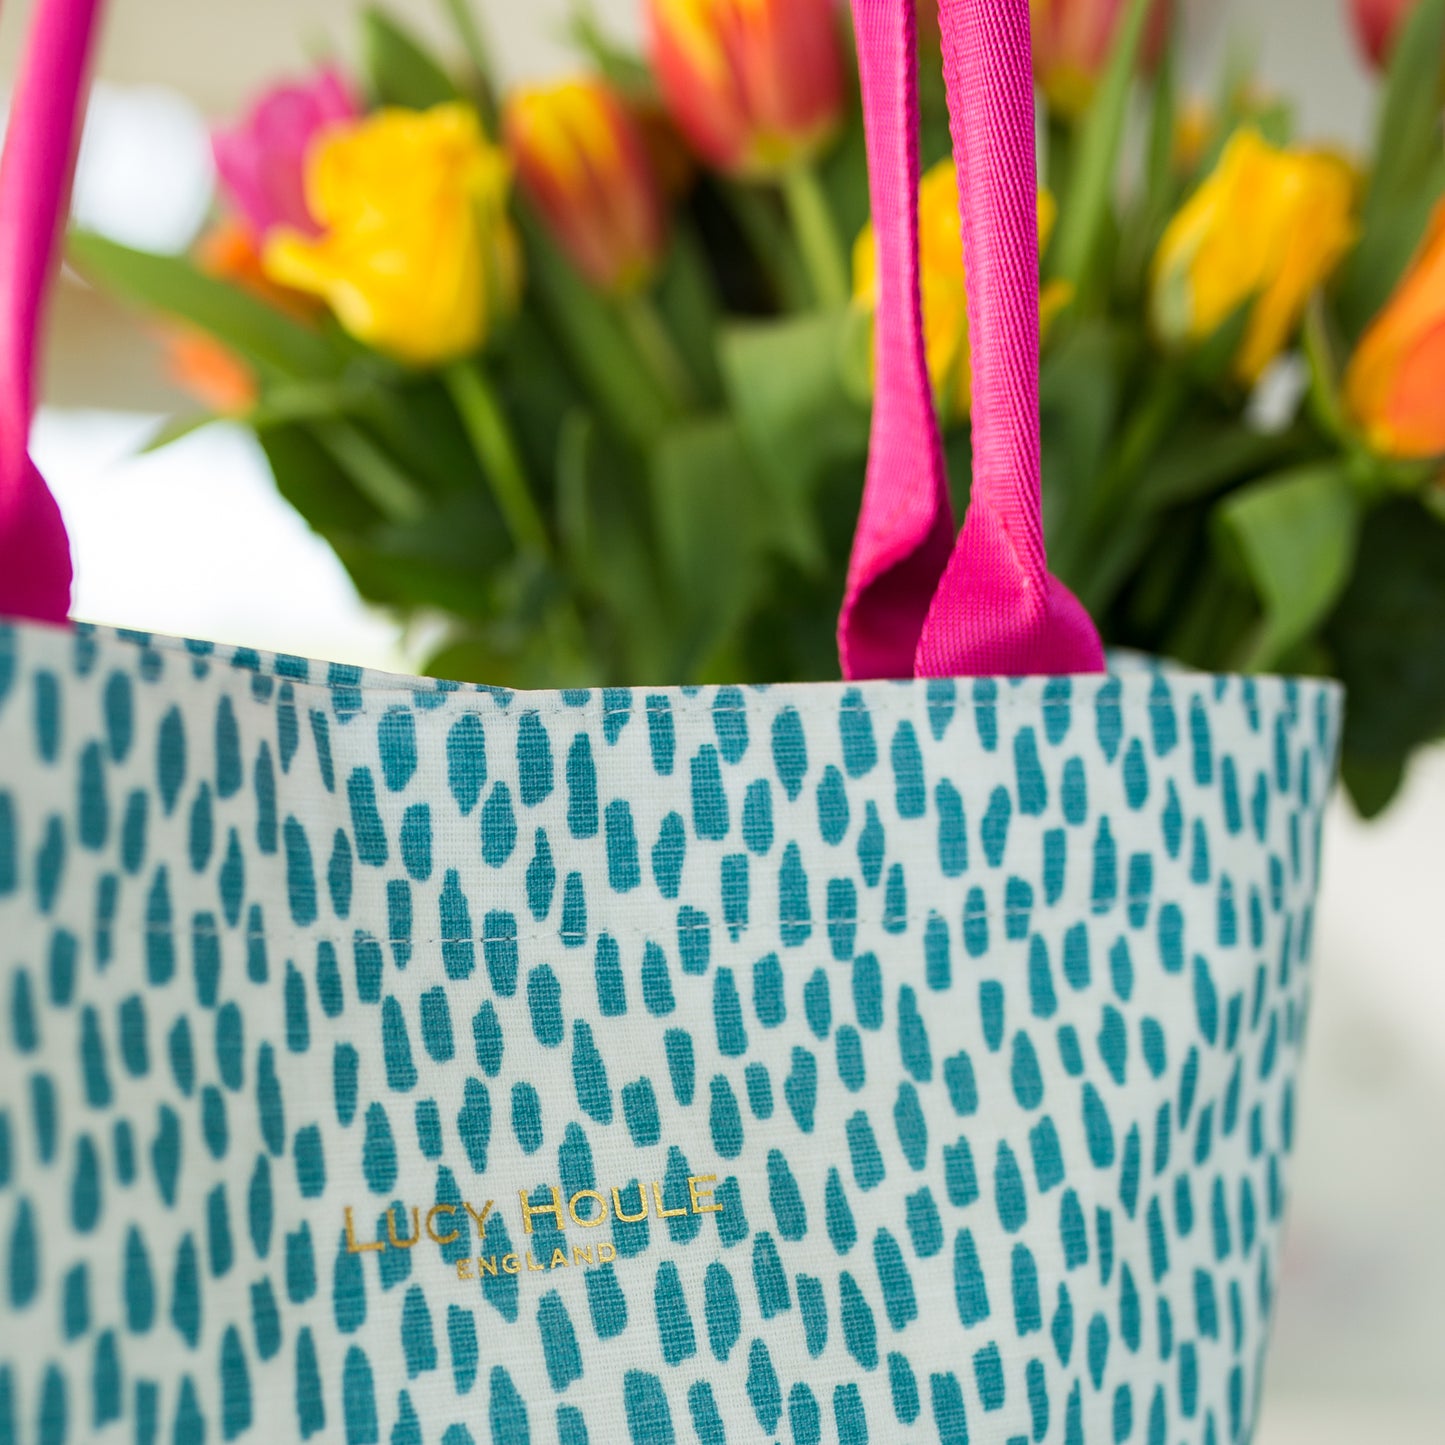 Aqua Cobblestone Small Tote Bag with Hot Pink Handles 'Limited Edition'